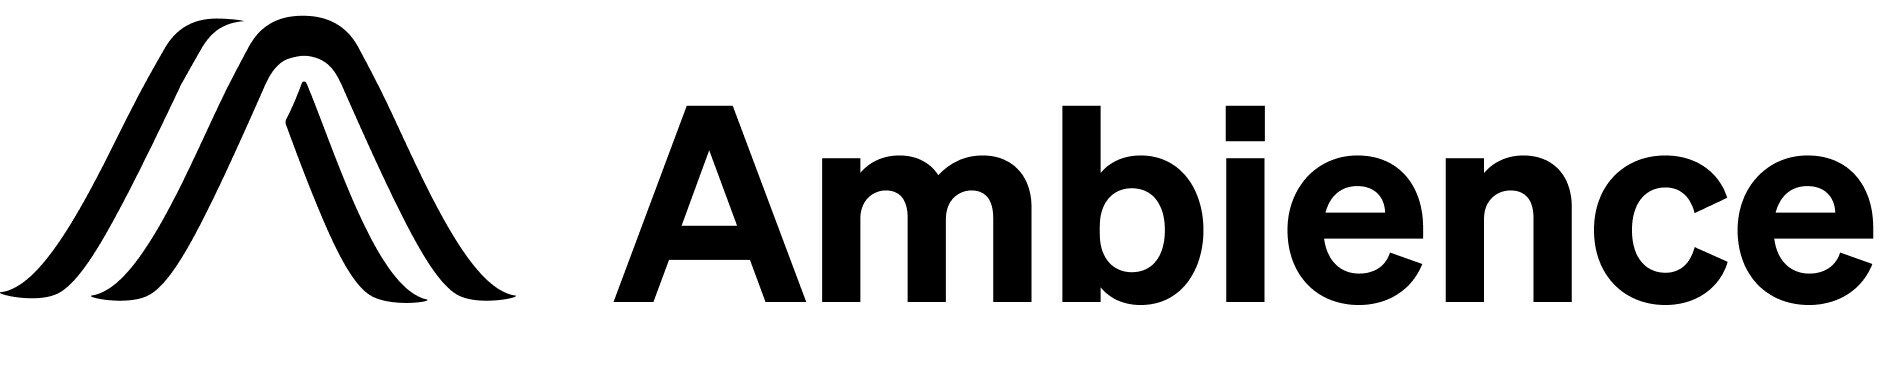 Ambience Healthcare Secures $70 Million in Series B Investment Round